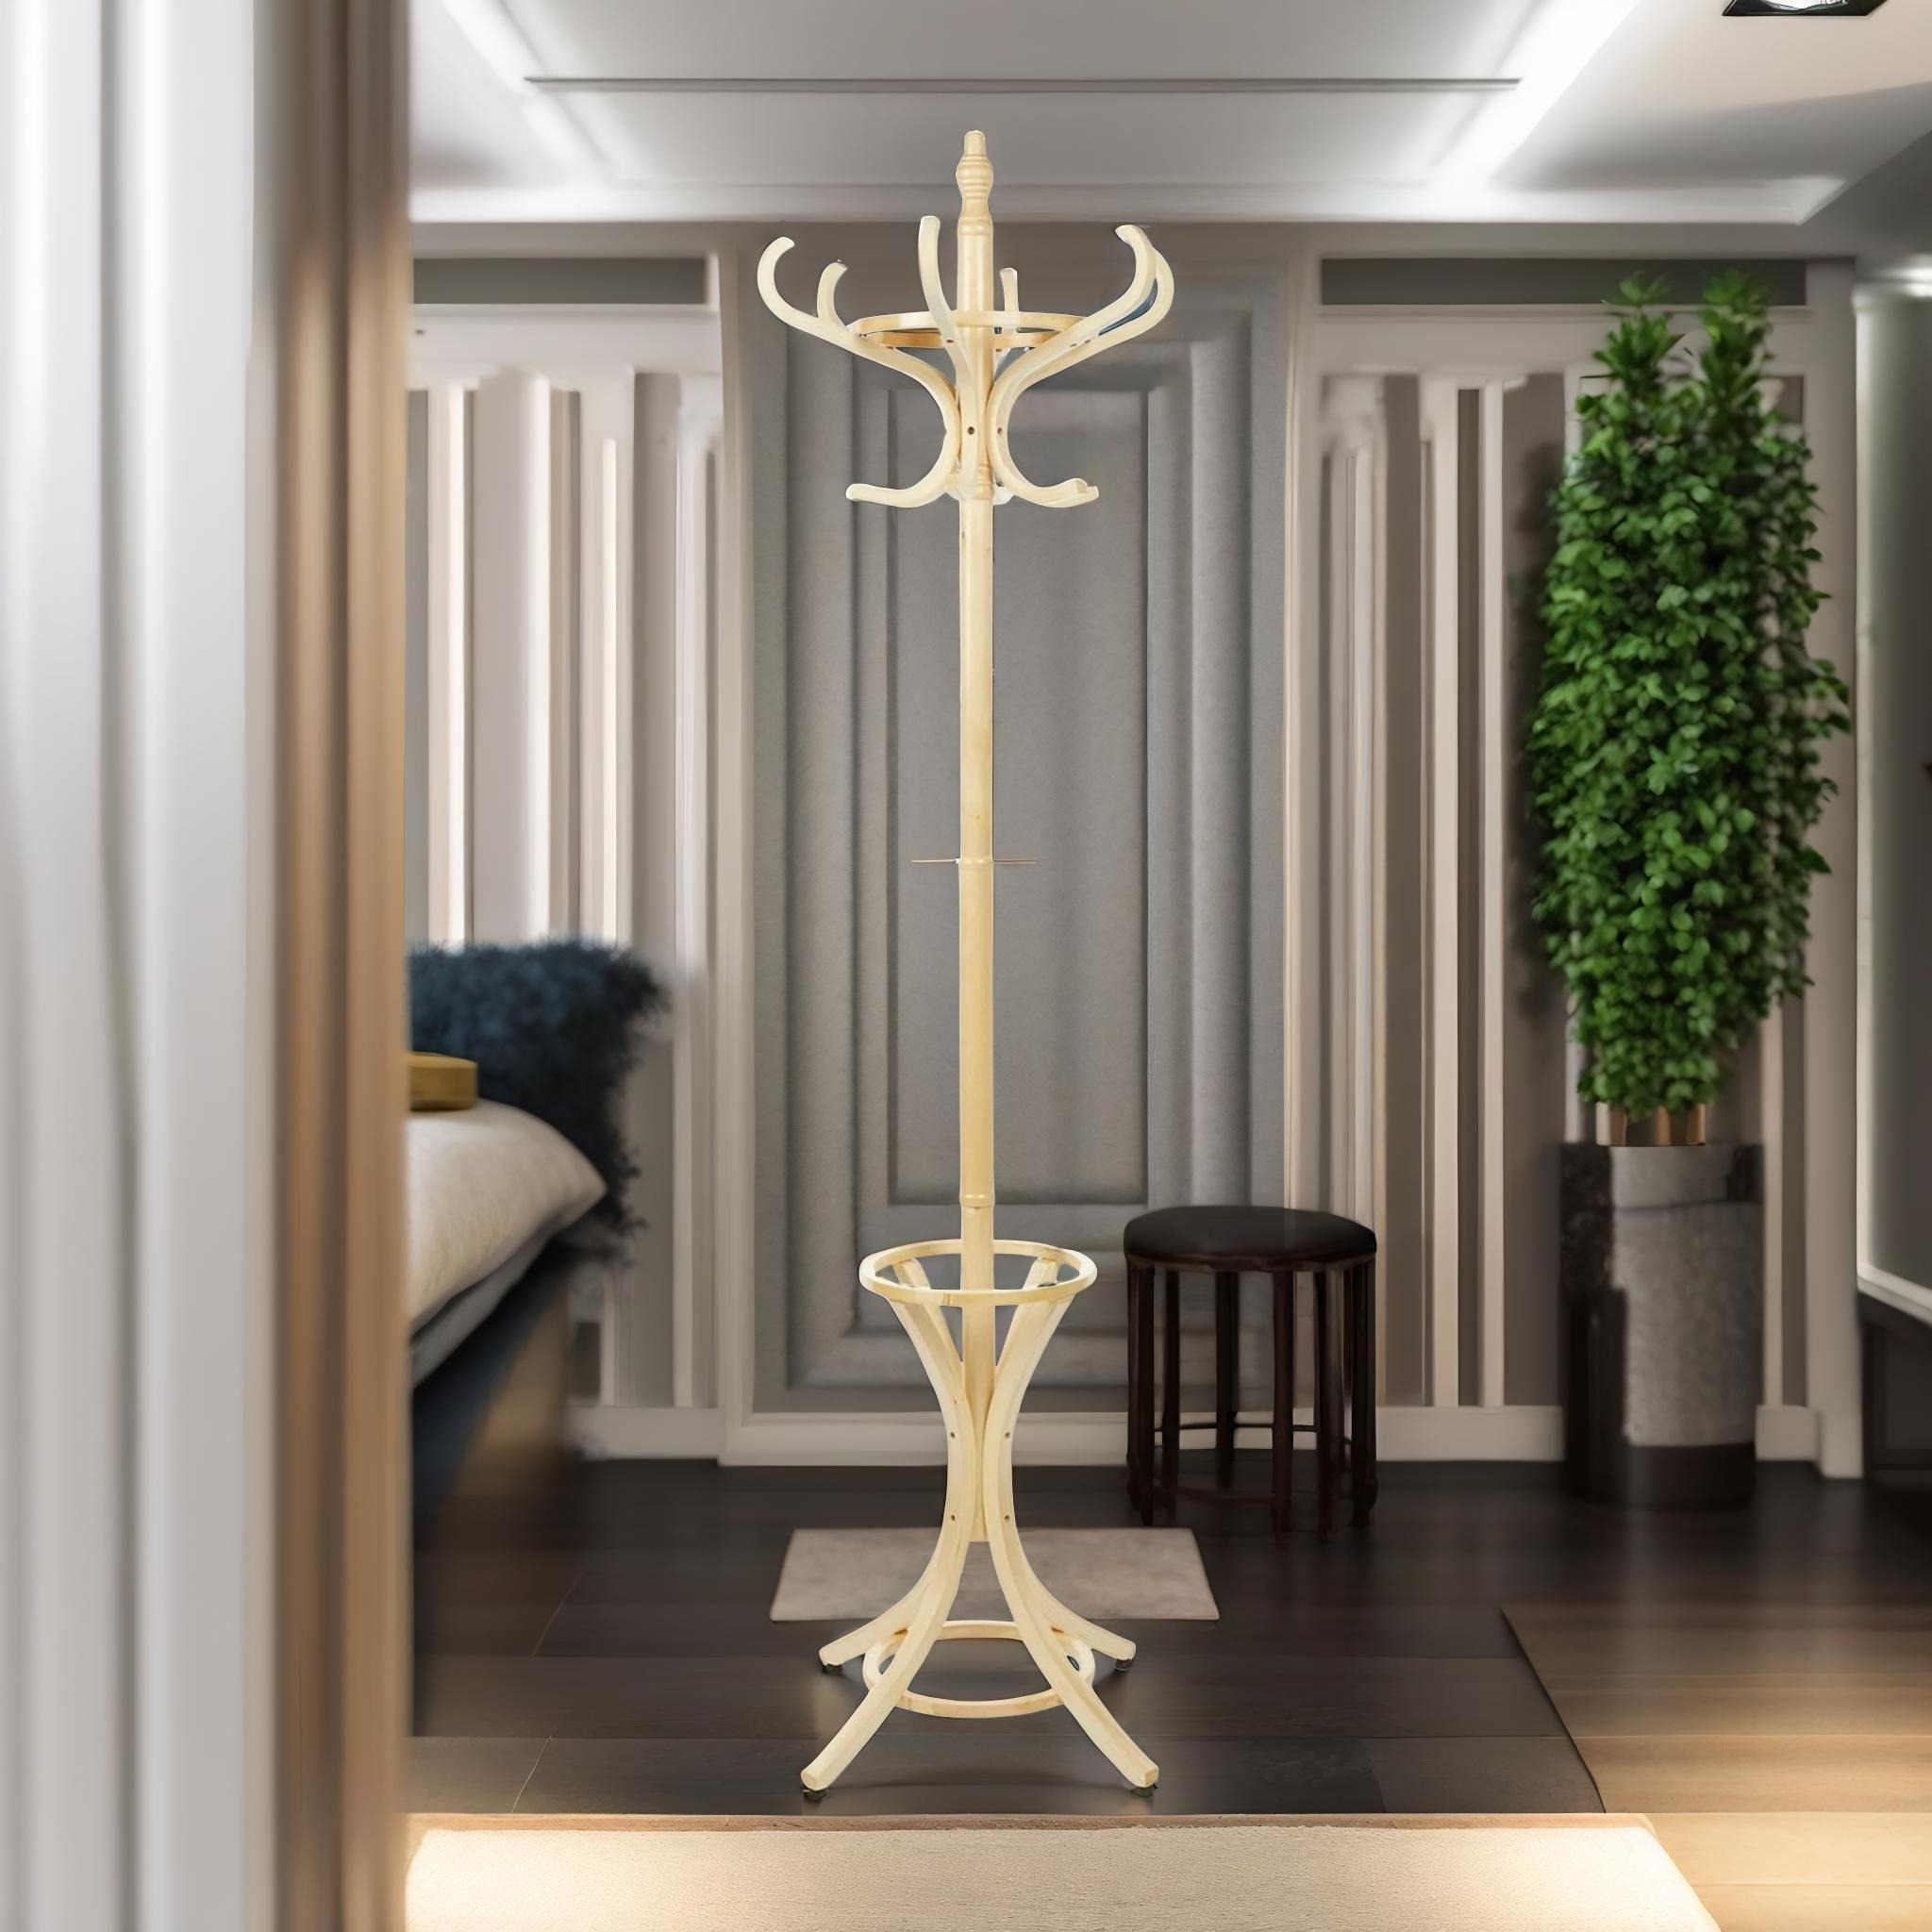 Wooden Coat Stand With 12 Hooks - image 1